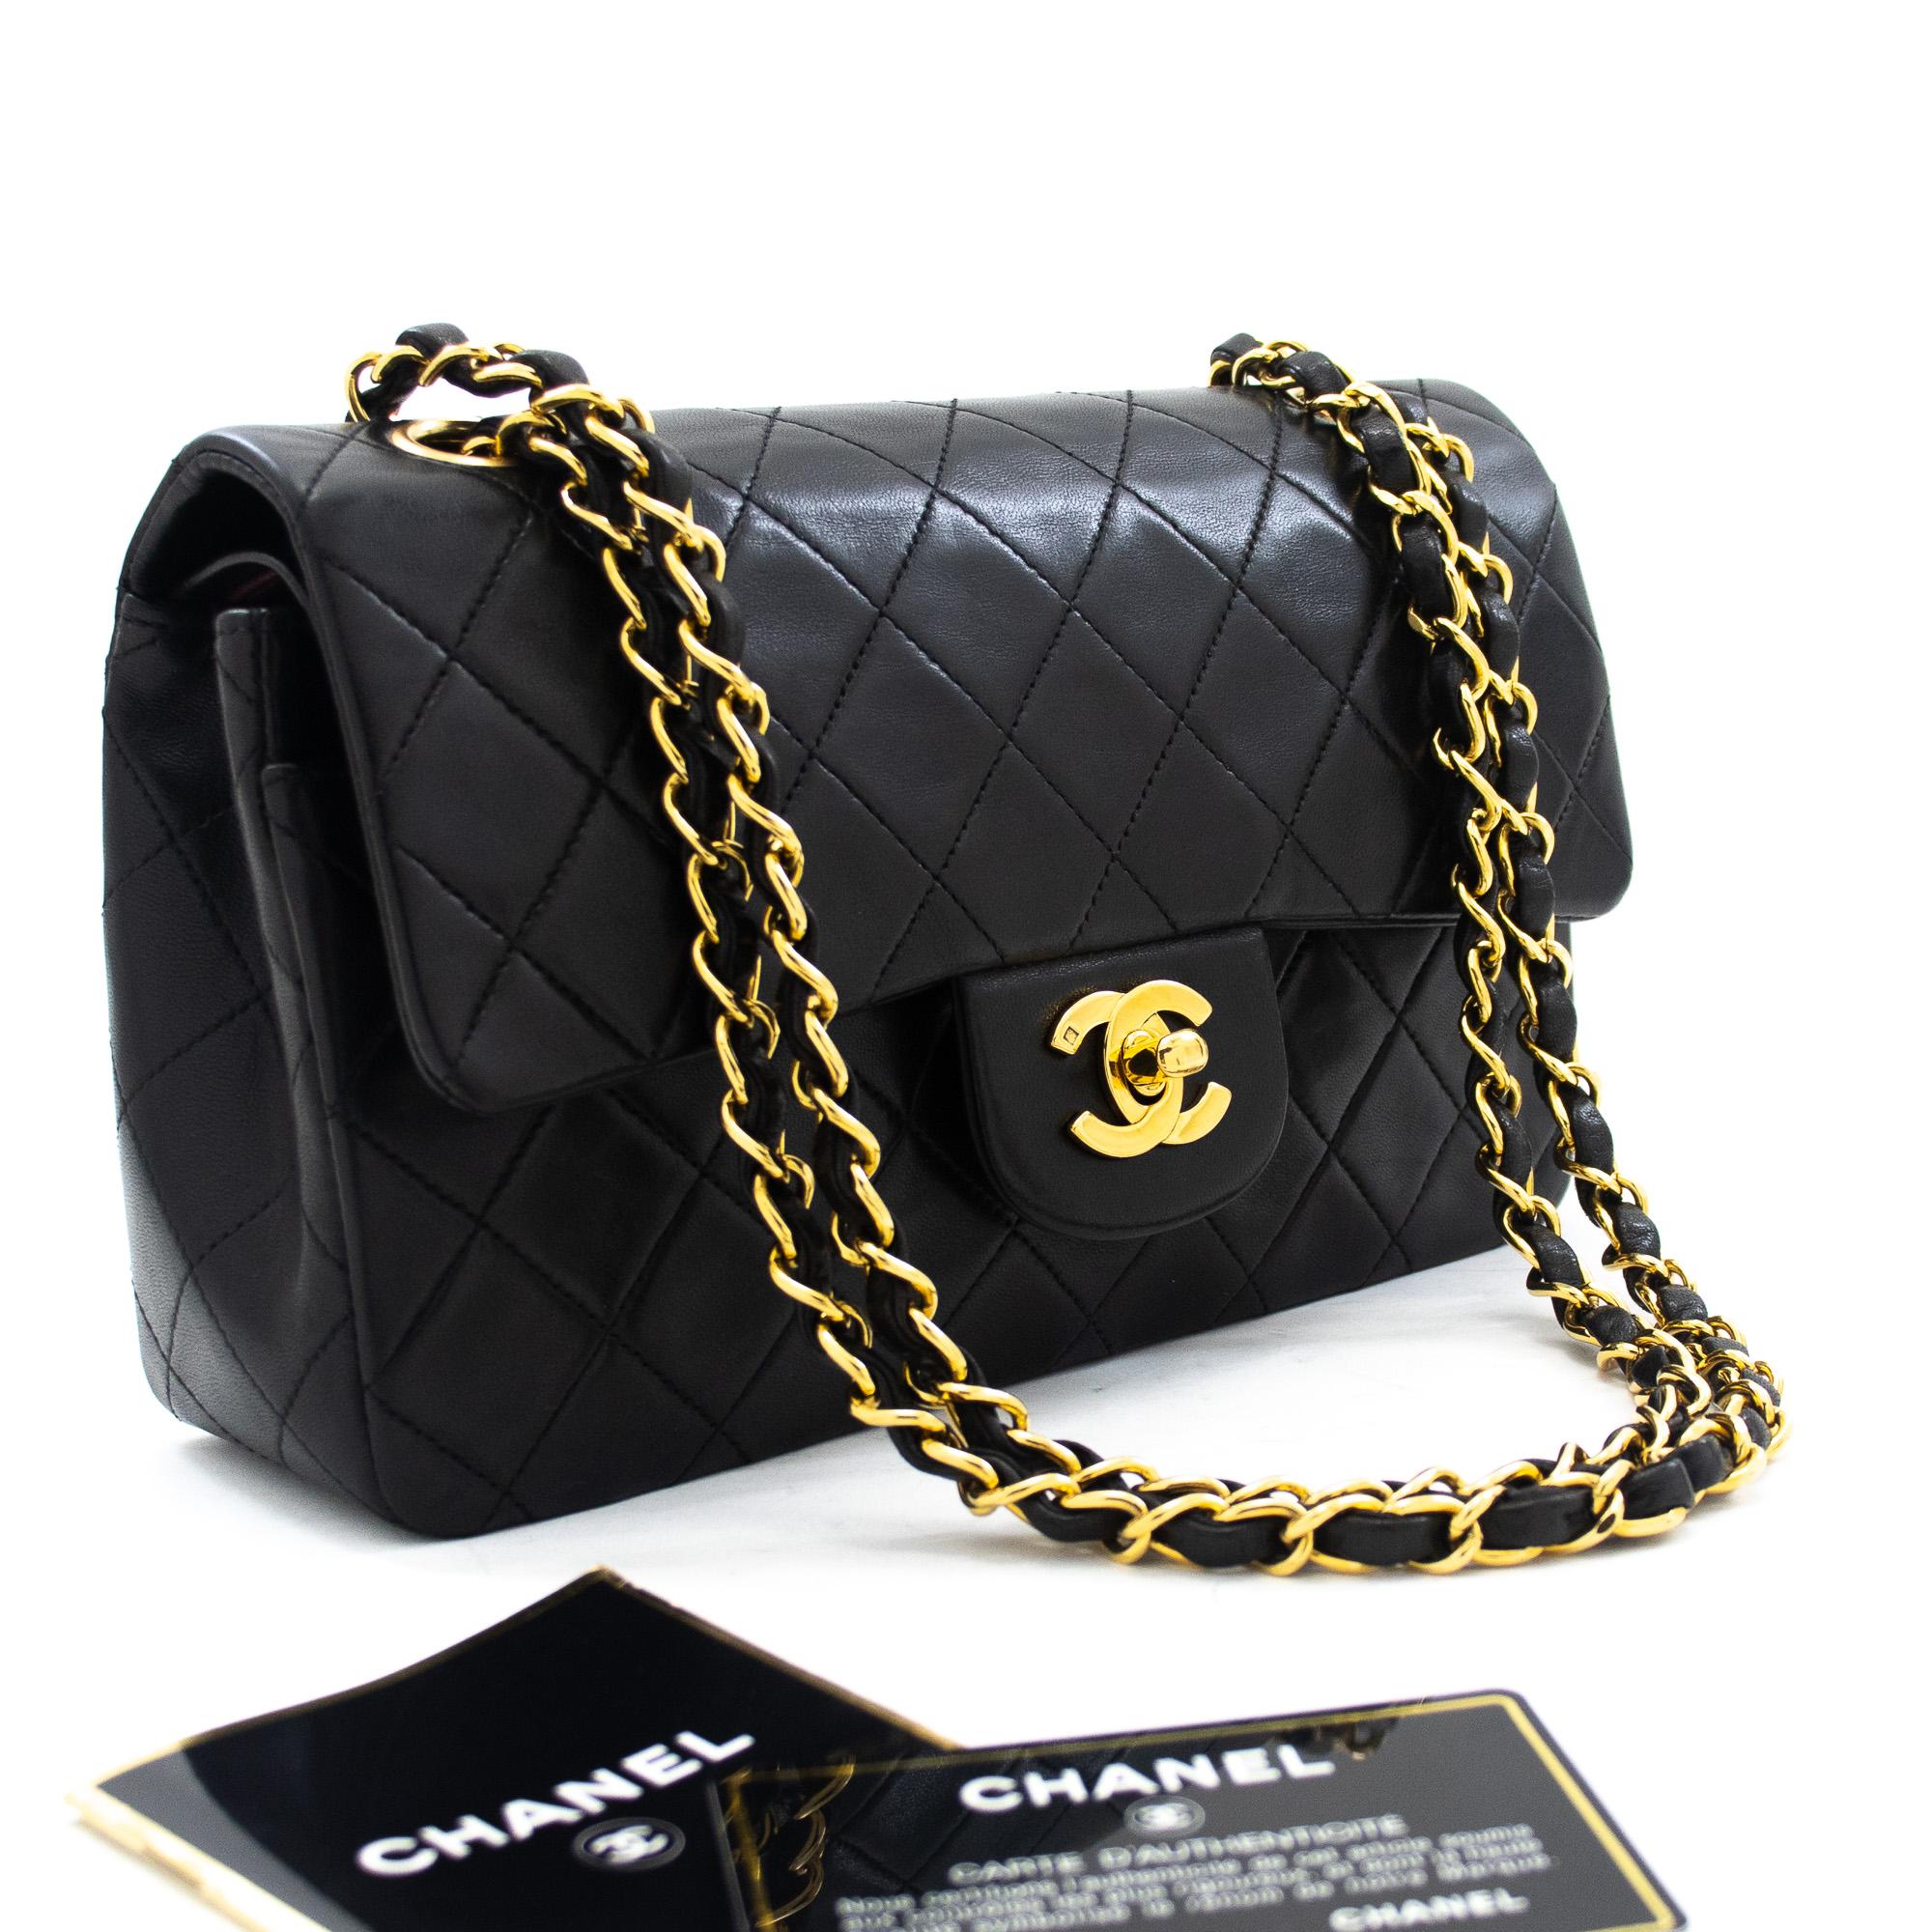 This iconic Chanel 9-inch double-flap bag has been crafted from quilted black lambskin and features a double flap. The front flap has been finished with the classic CC logo twist lock, with the second flap featuring a stud closure and one slip-in